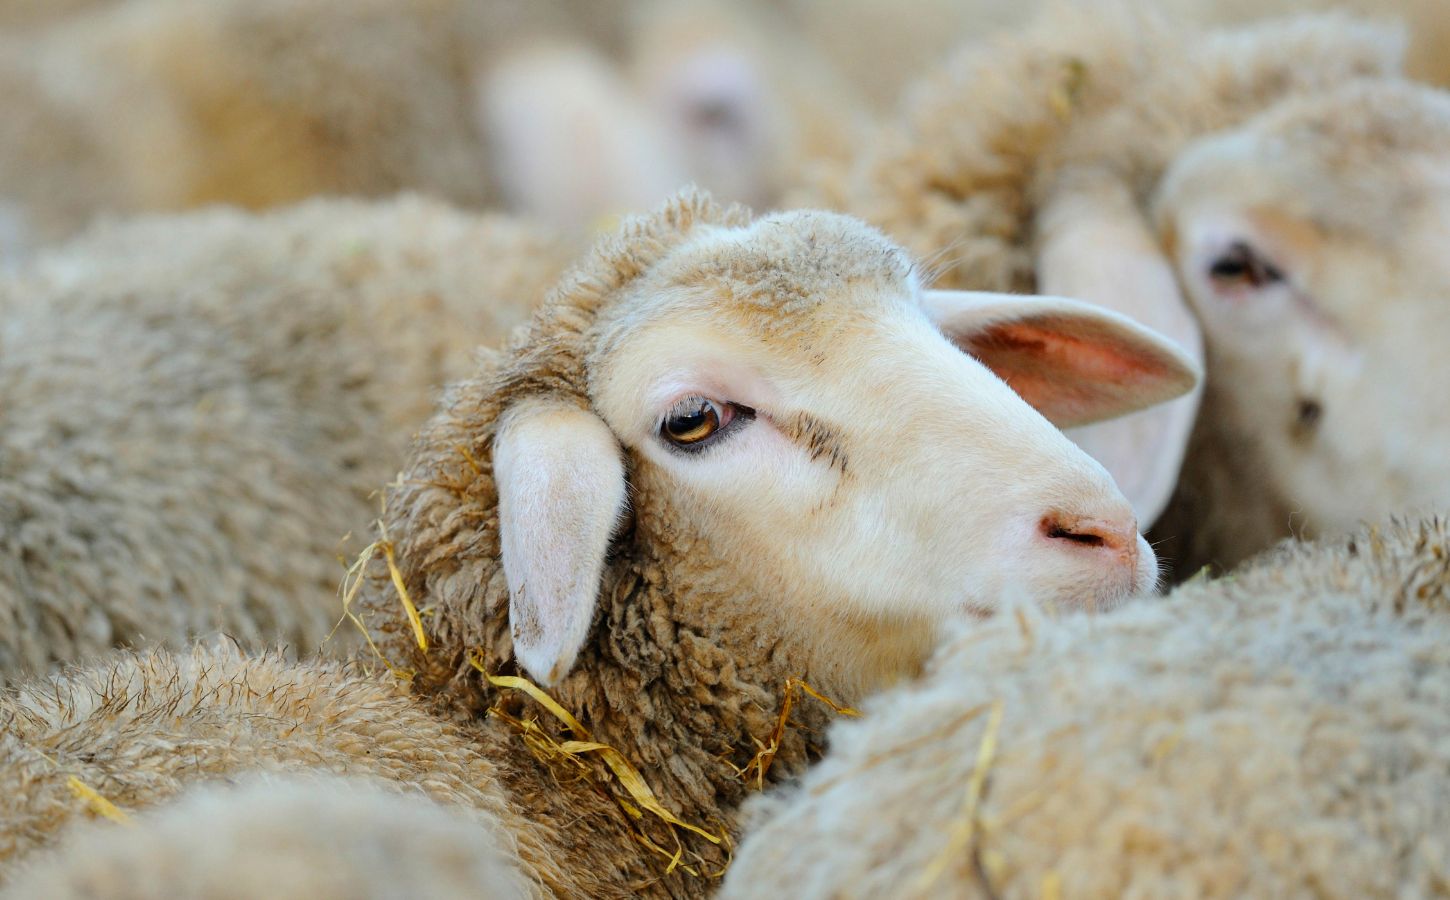 Live export of sheep, which is still legal in Australia